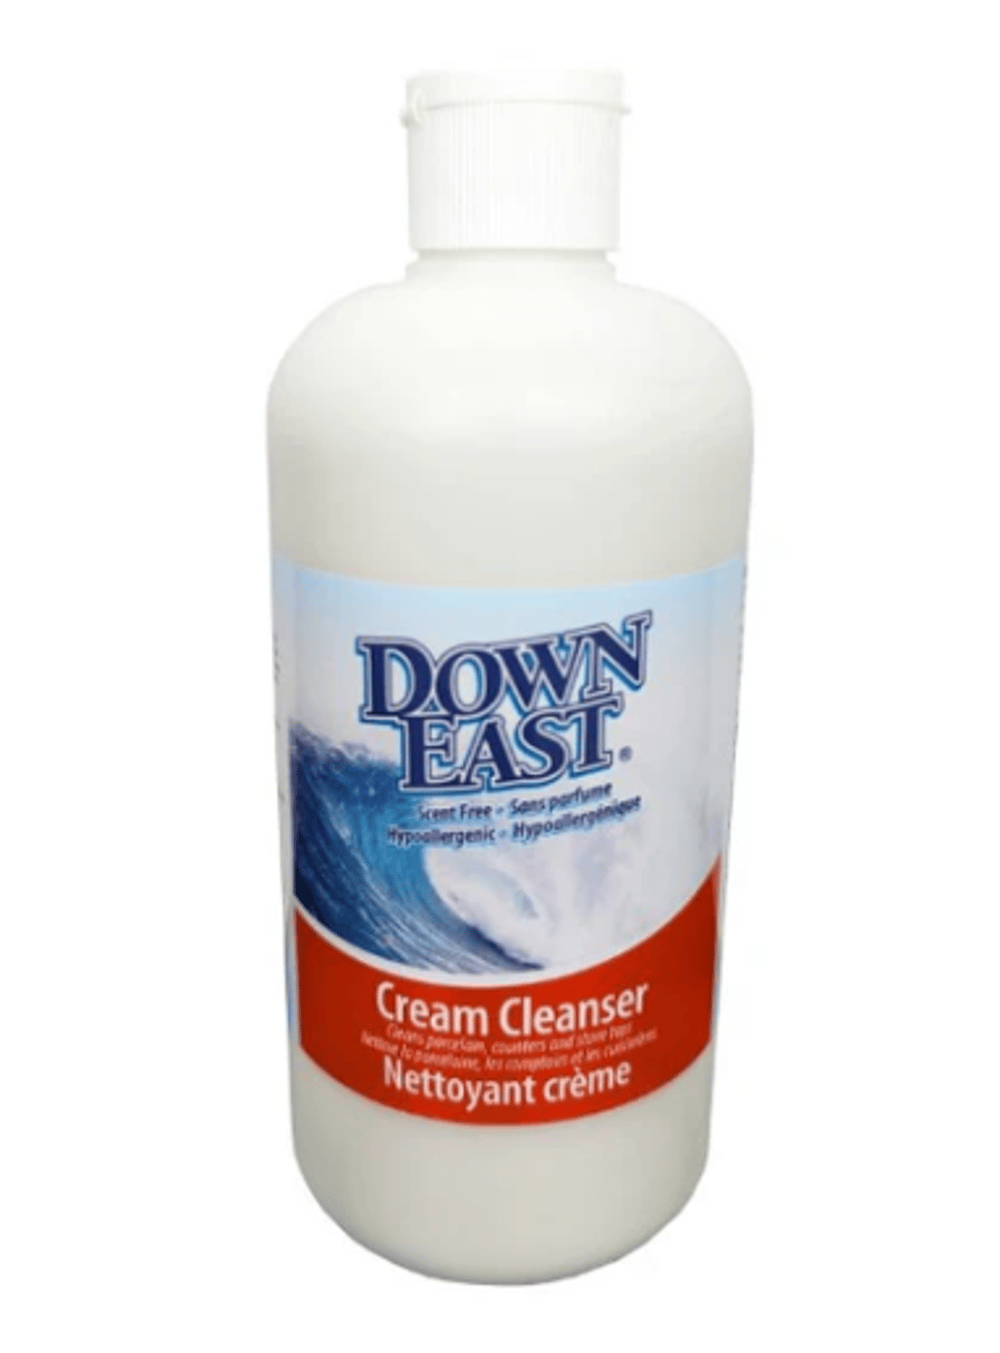 Cream Cleanser for Downeastclean